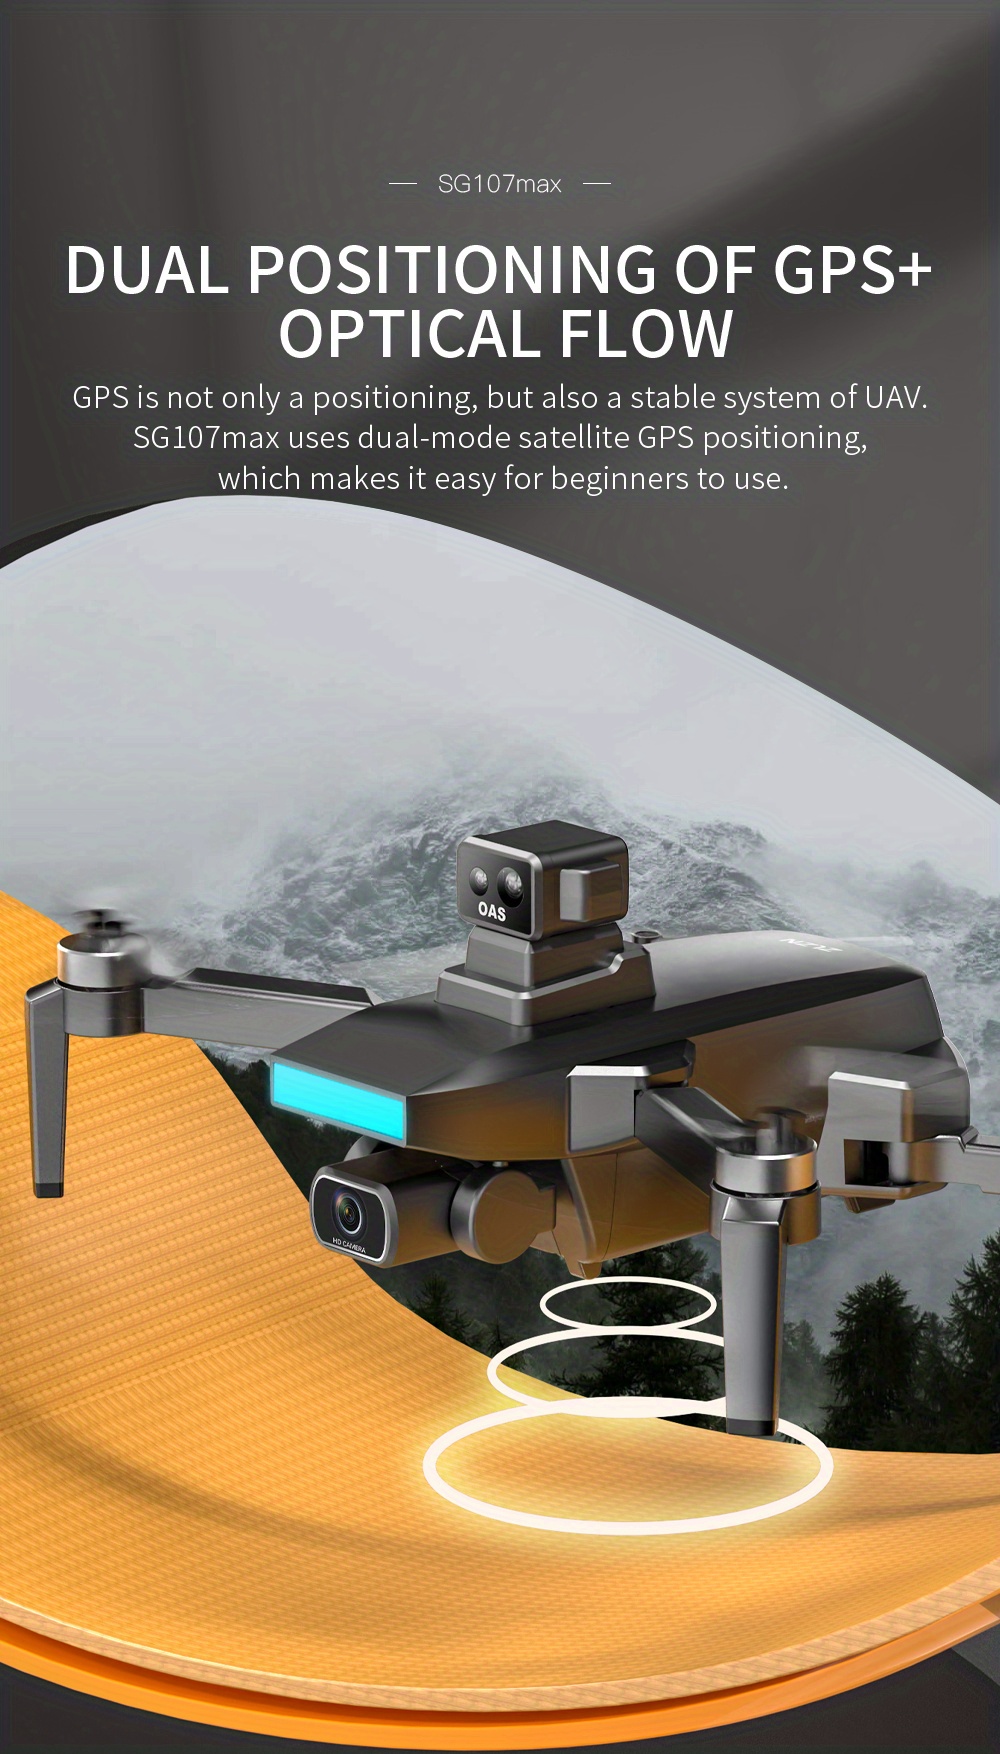 smart follow drone with 2 axis gimbal esc camera gps positioning more one key take off landing headless mode details 7